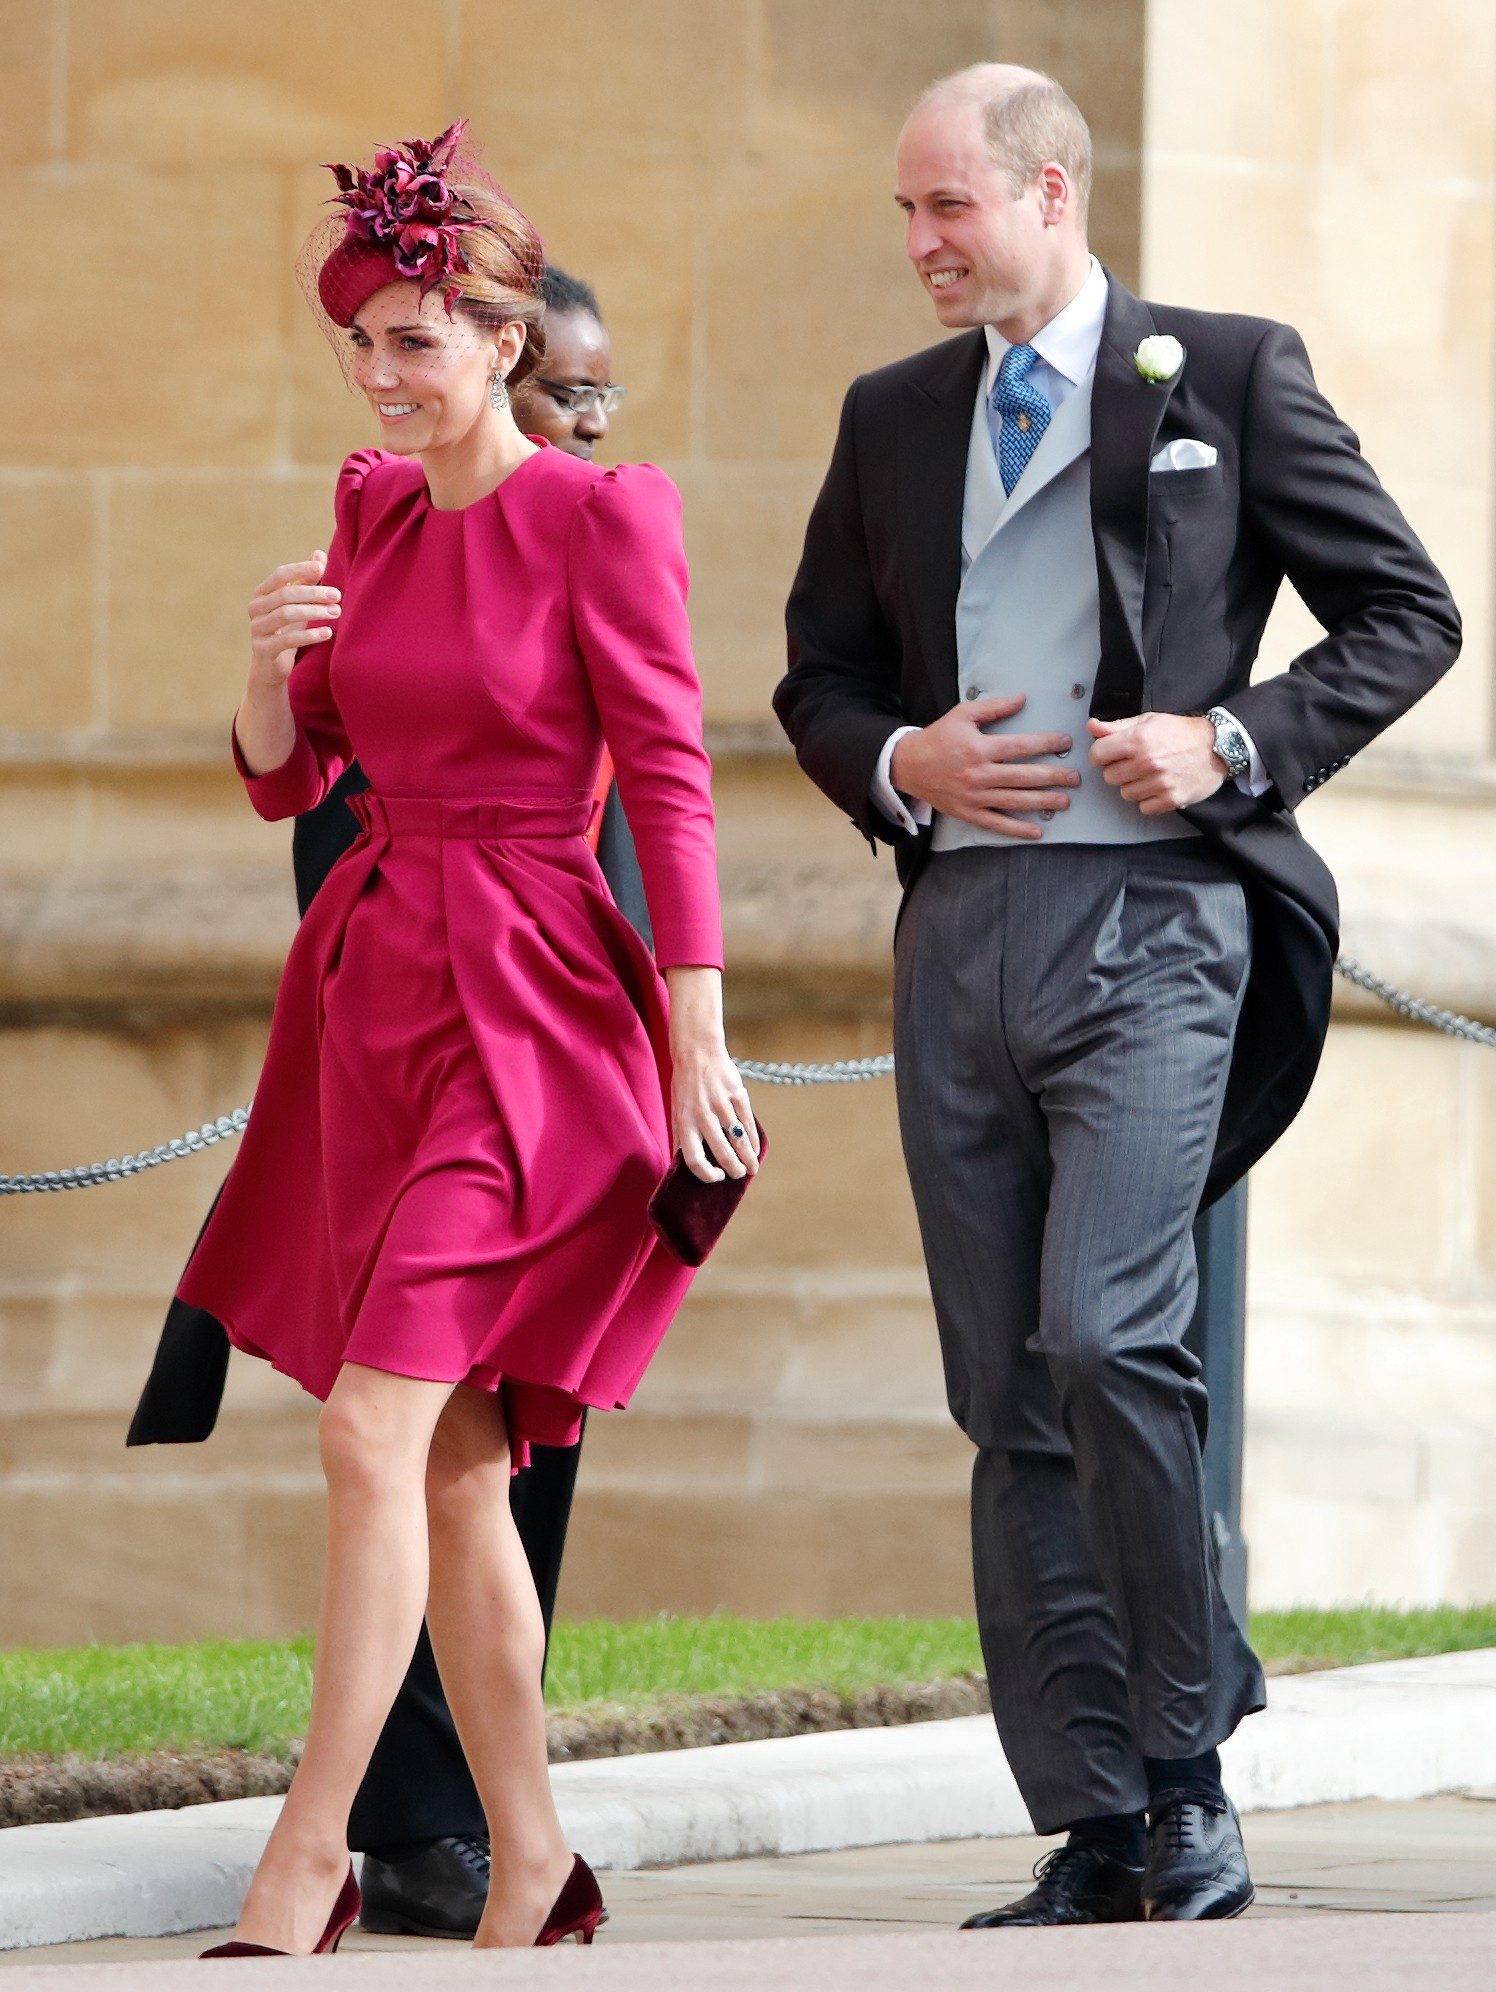 the most stylish celebrity wedding guest looks – and why they worked